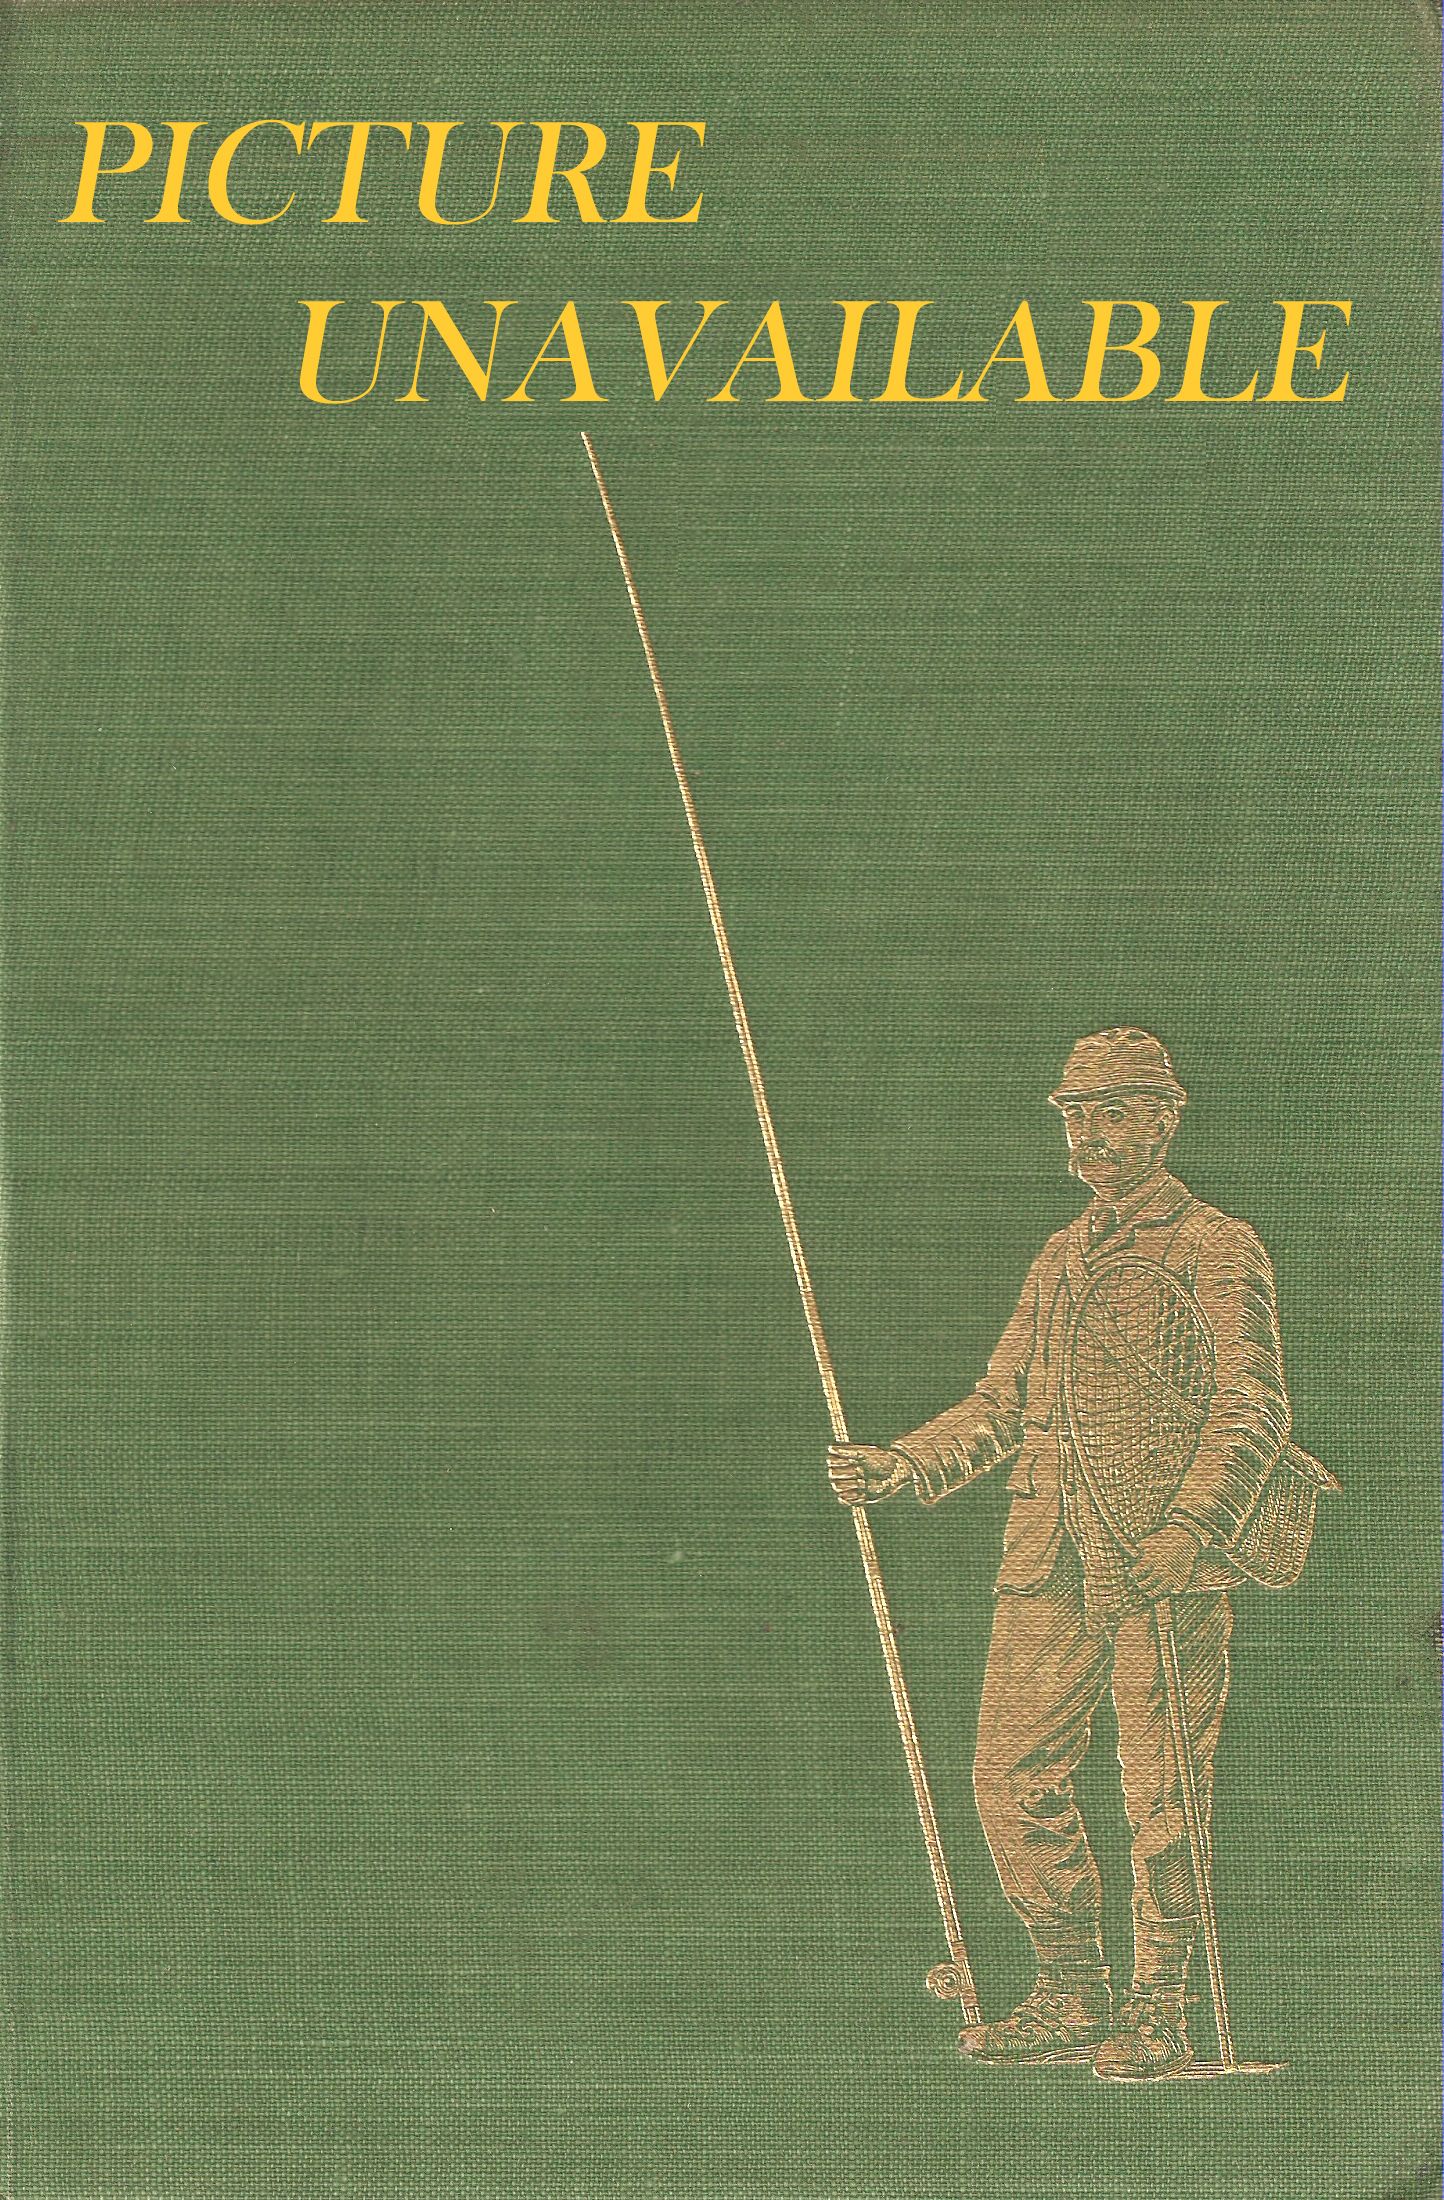 THE FAR FROM COMPLEAT ANGLER. By Tom Fort.